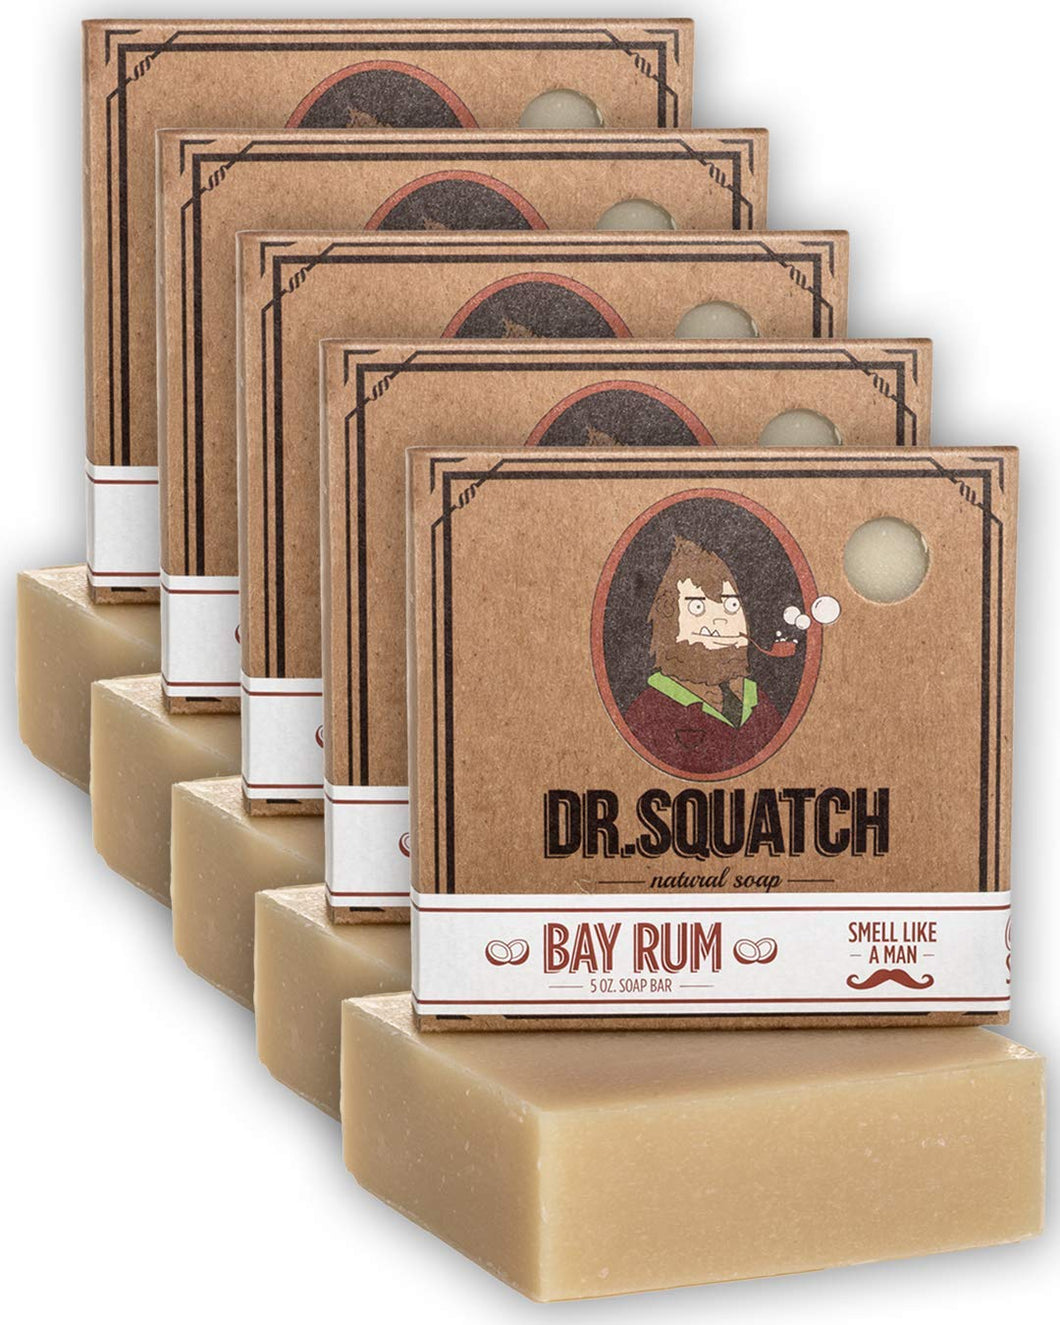 Dr. Squatch Bay Rum Soap 5-Pack Bundle – Bar Soap for Men with Natural Scent, Bay Rum, Kaolin Clay, Shea Butter – Handmade with Organic Oils in USA